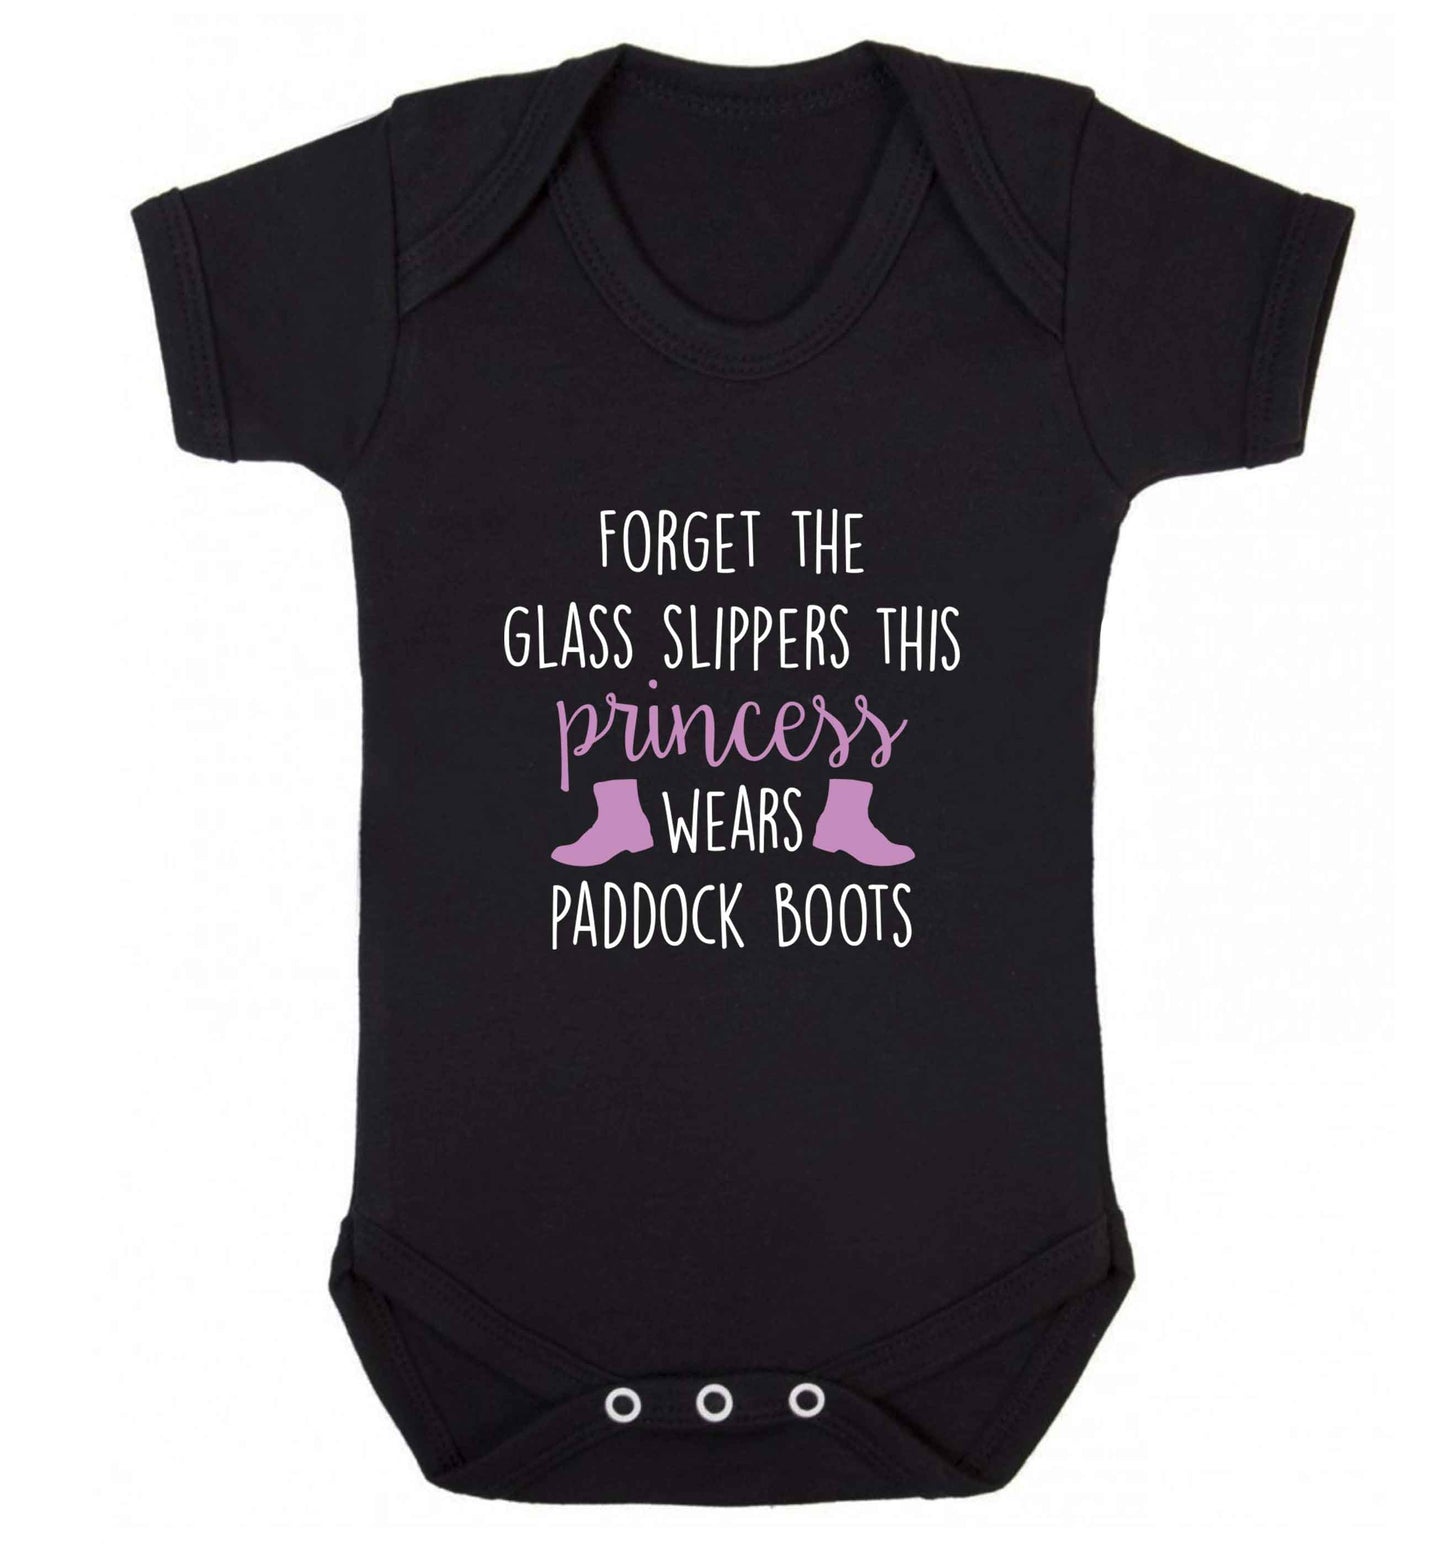 Forget the glass slippers this princess wears paddock boots baby vest black 18-24 months